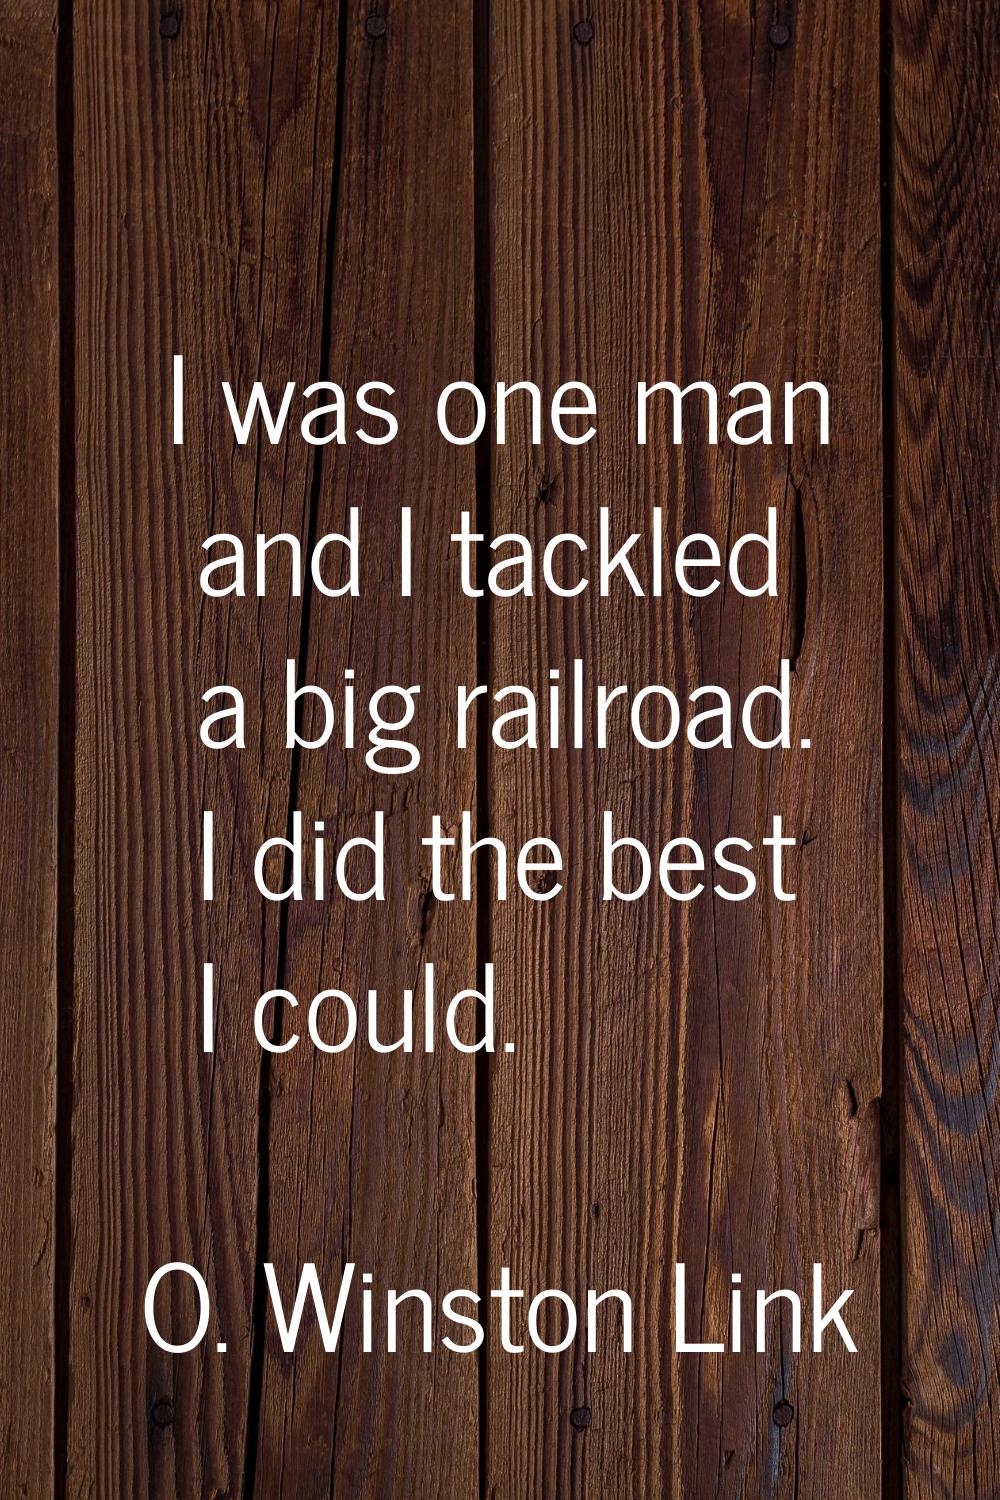 I was one man and I tackled a big railroad. I did the best I could.